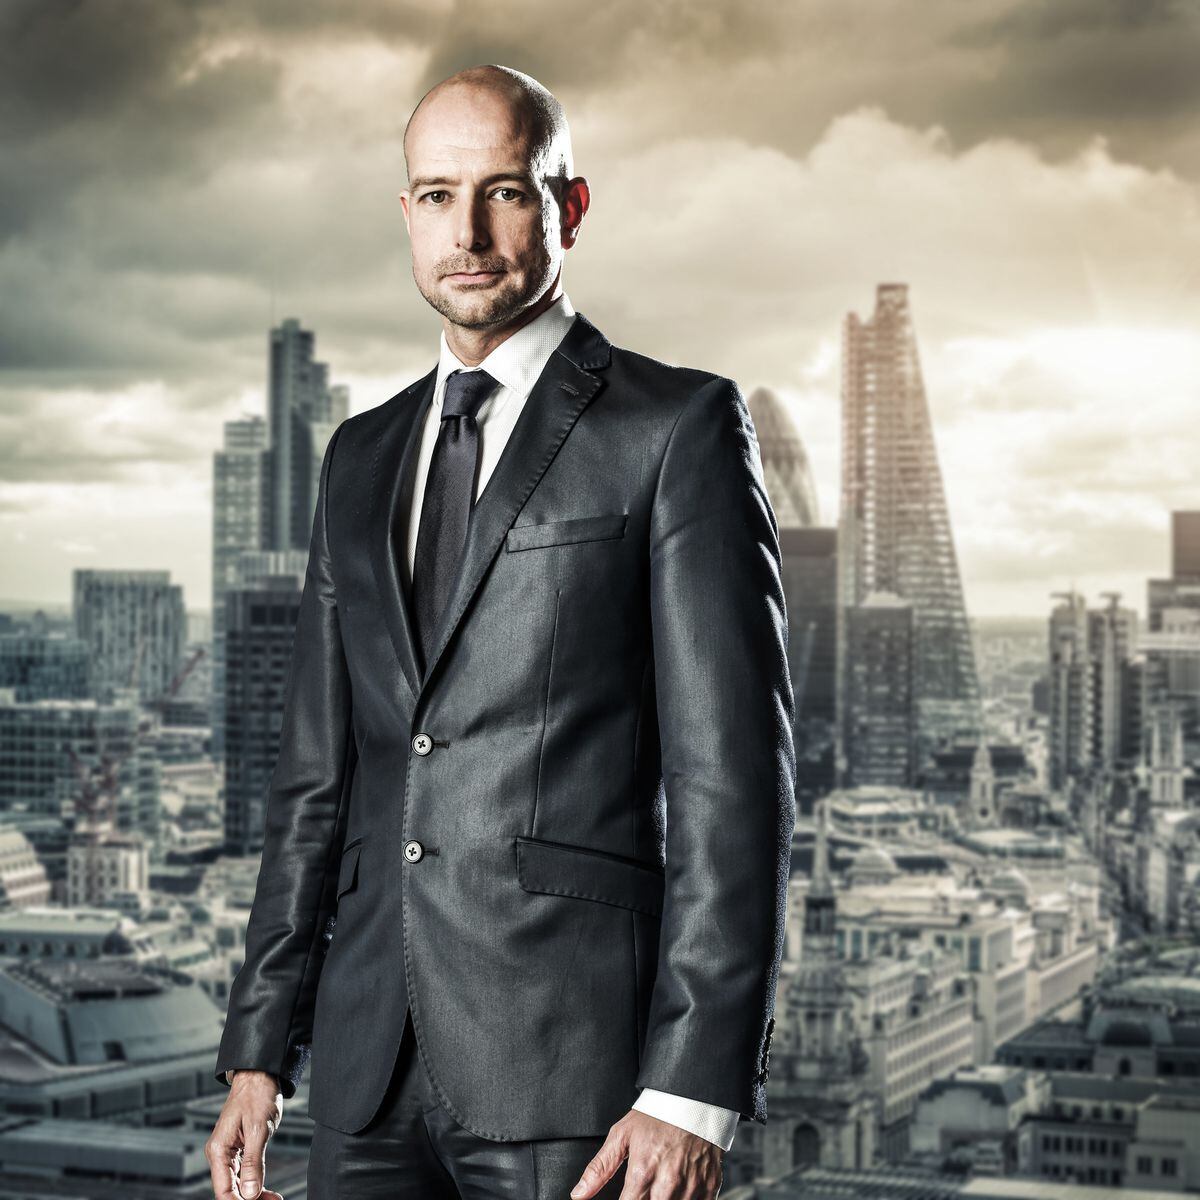 Chiles Cartwright as seen in the Apprentice on 2014 